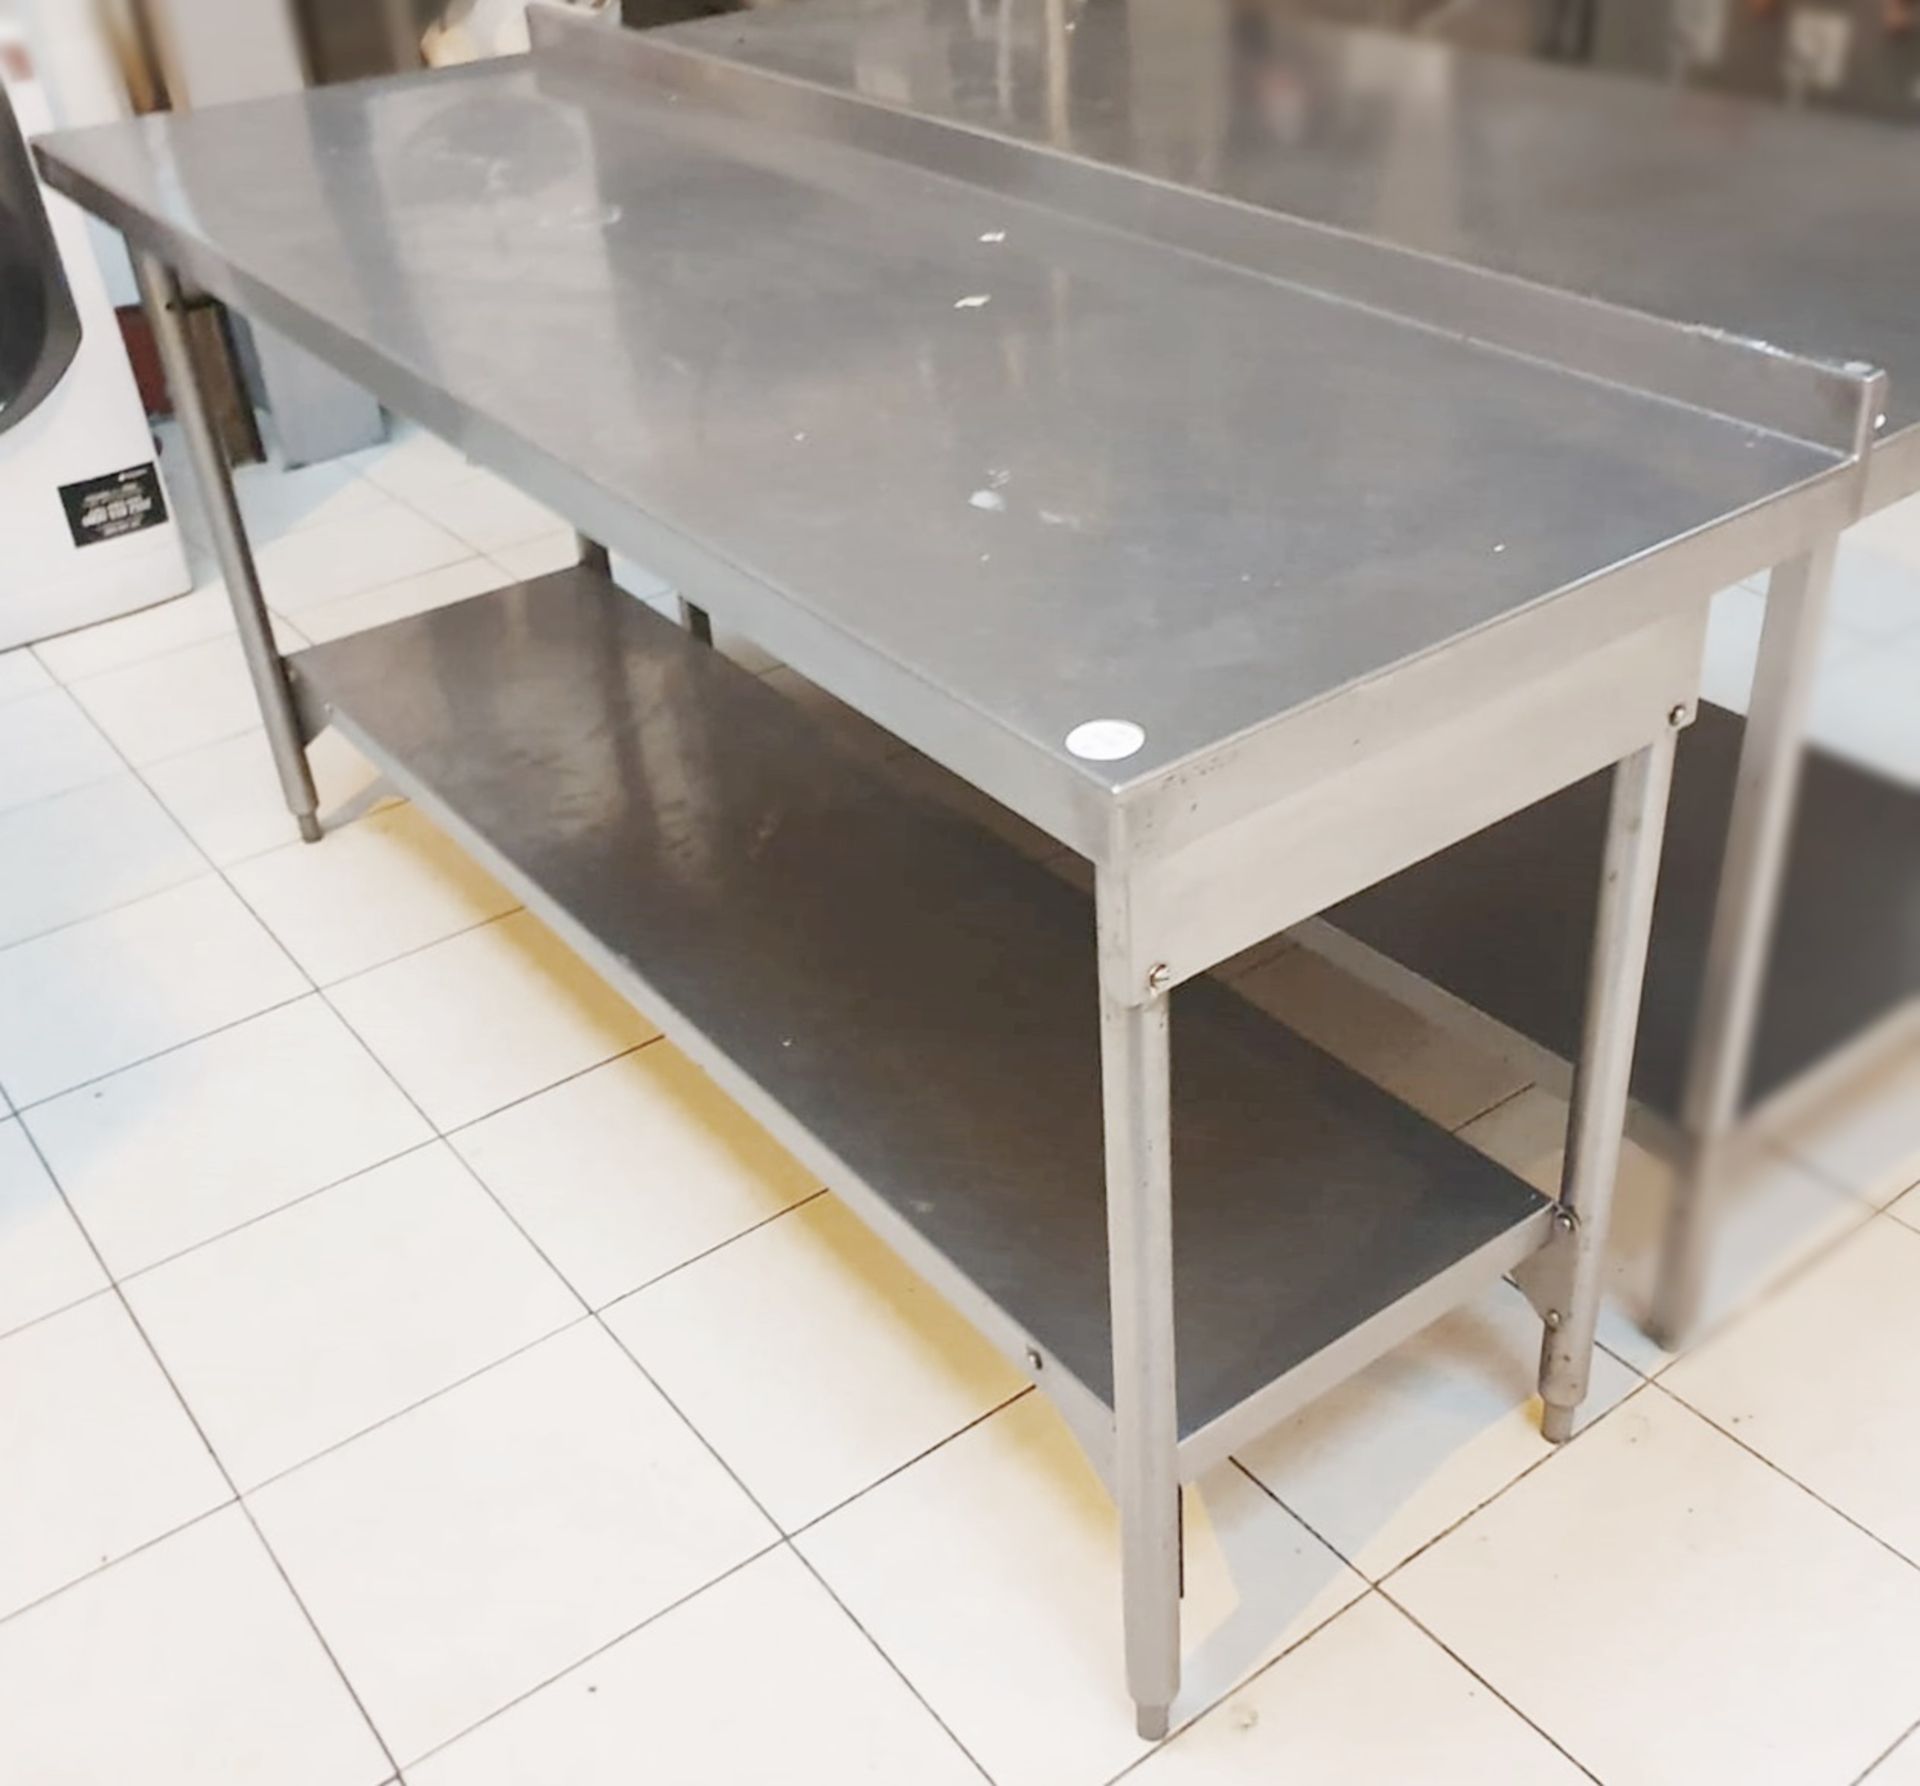 1 x Stainless Steel Prep Table With Upstand And Bottom Shelf **£5 Start - No Reserve**